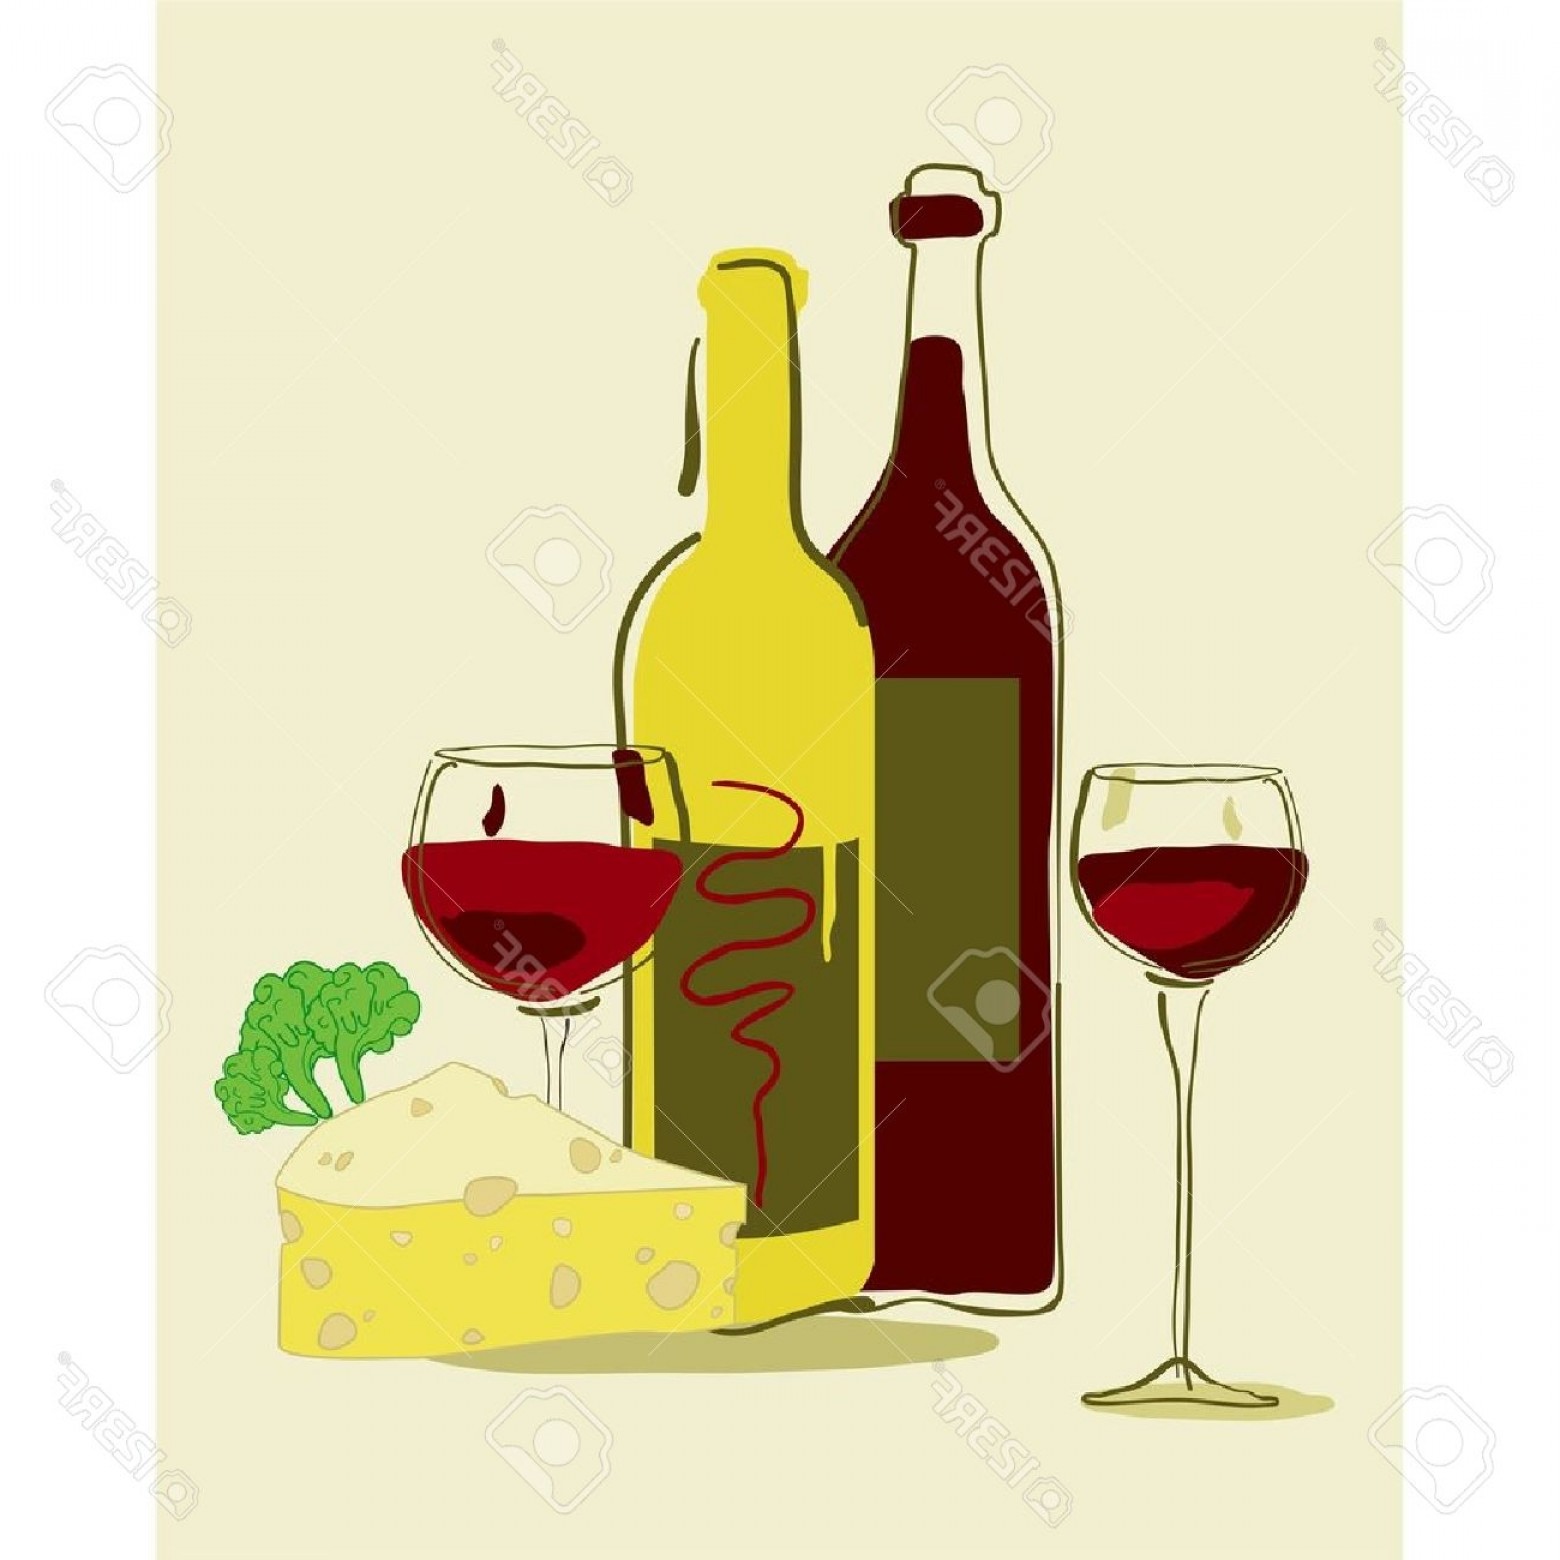 Free Wine Party Cliparts, Download Free Clip Art, Free Clip.